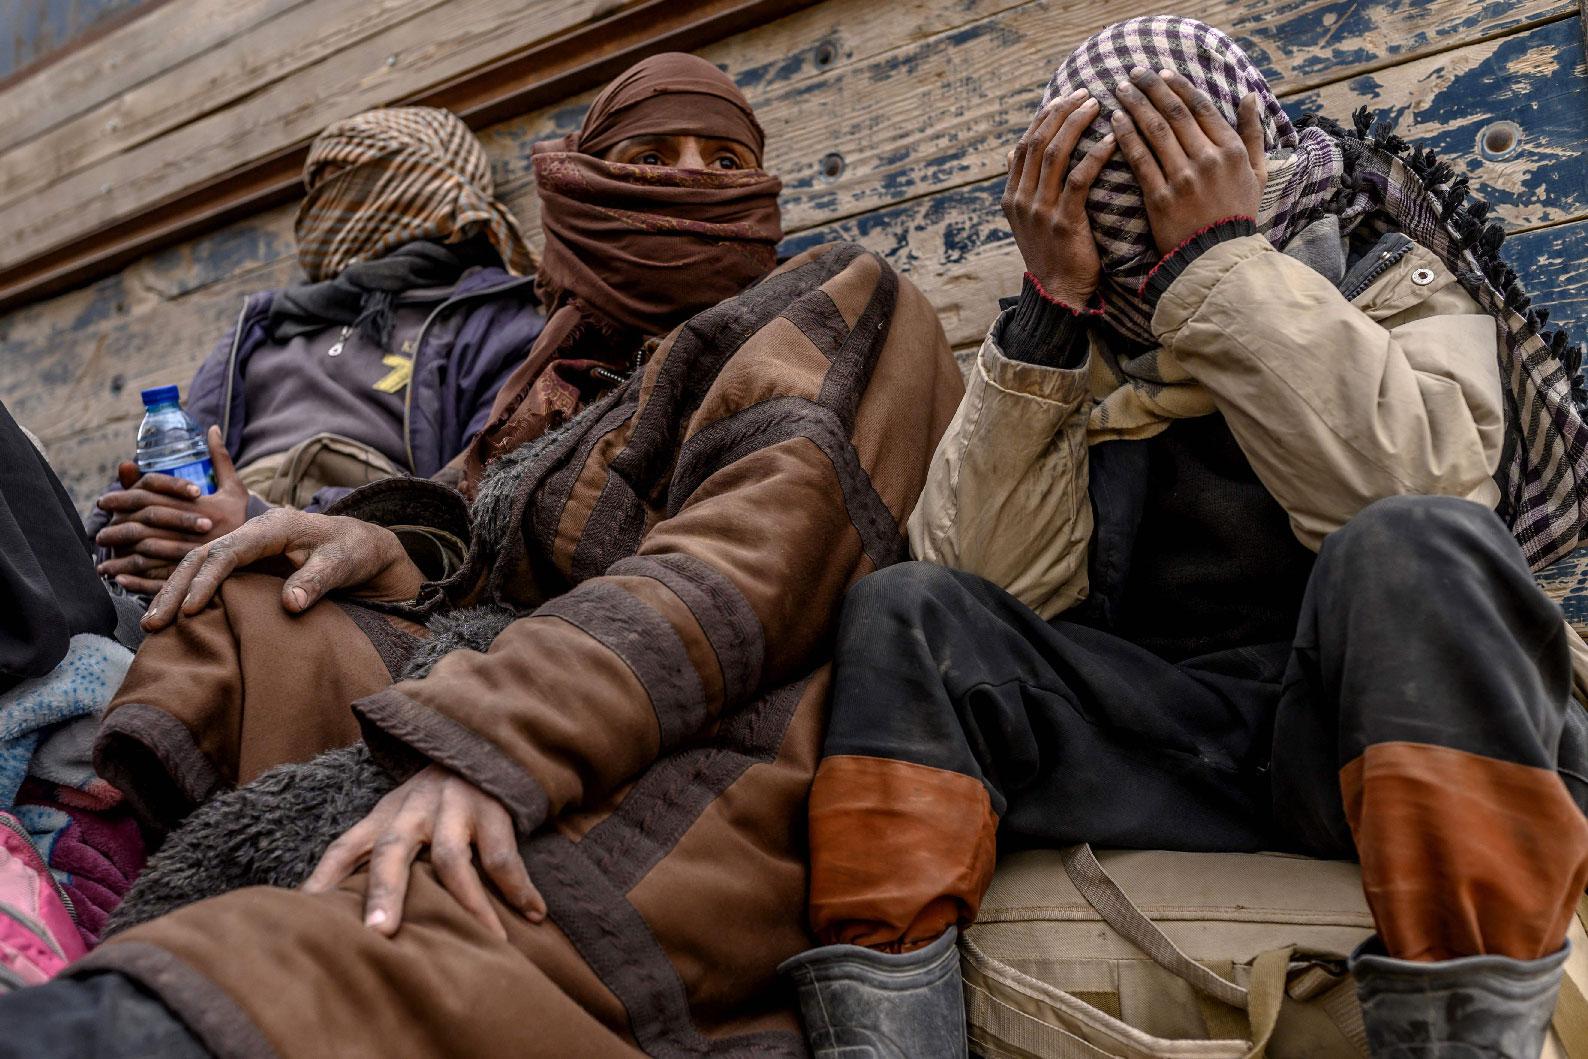 Men suspected of being Islamic State (IS) wait to be searched by members of the Kurdish-led Syrian Democratic Forces (SDF) after leaving the IS group's last holdout of Baghouz, in Syria's northern Deir Ezzor province on February 27, 2019.